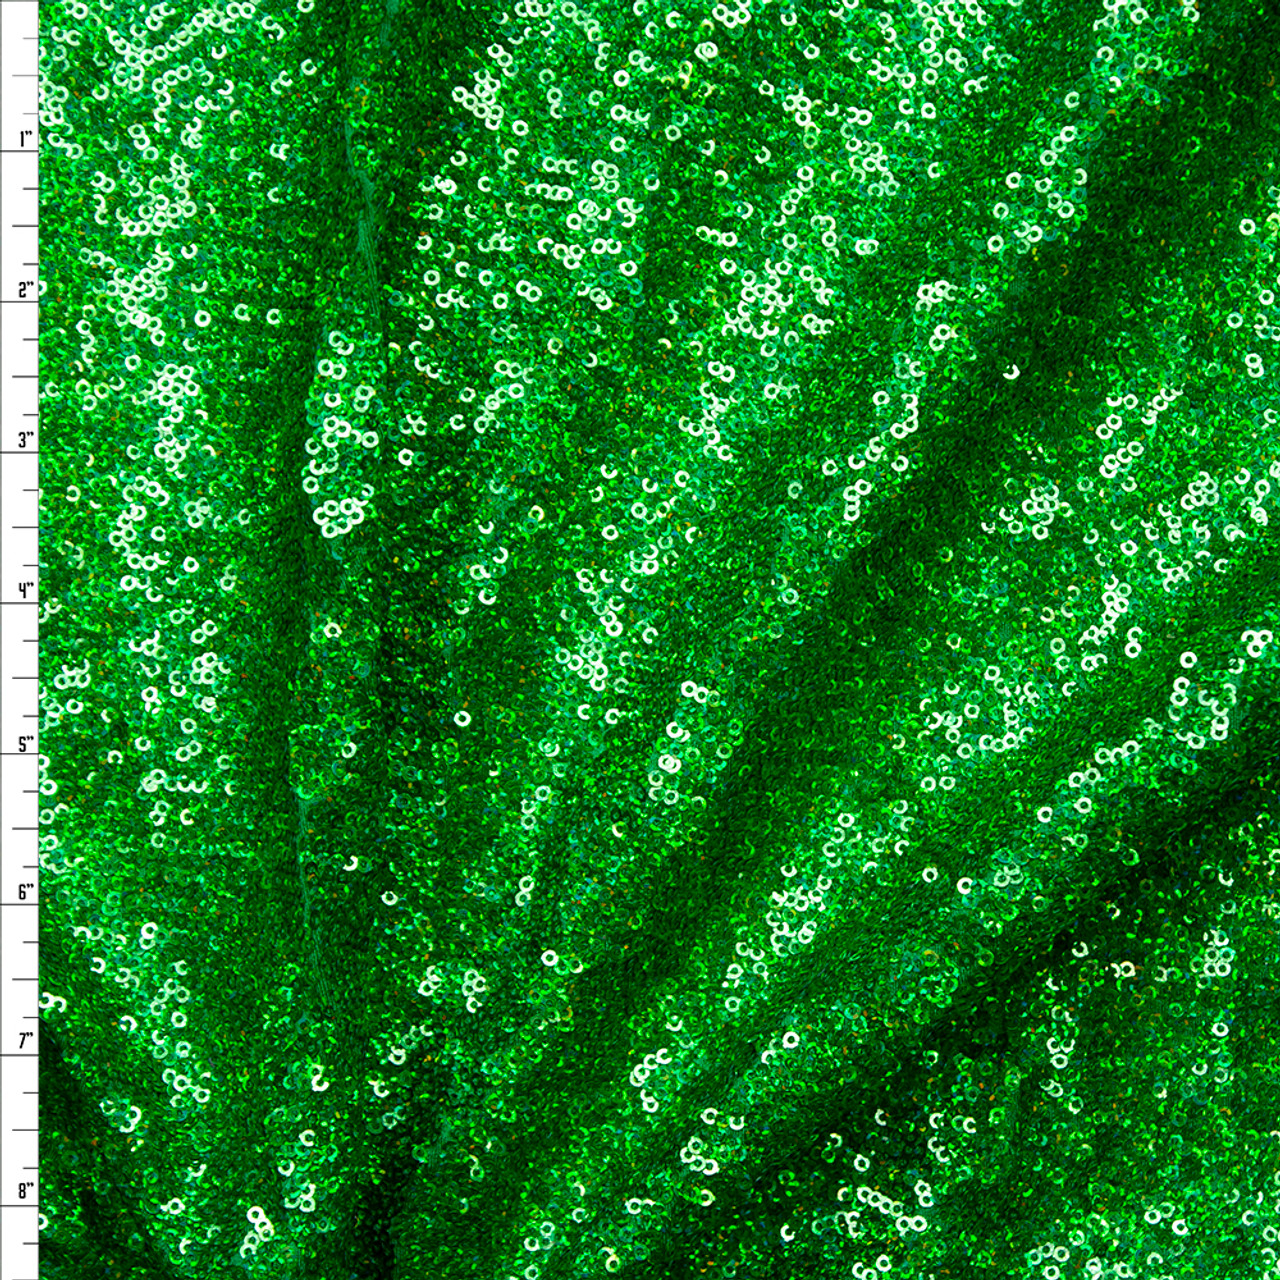 Green Ariel Sparkle Spandex, Holographic Fabric